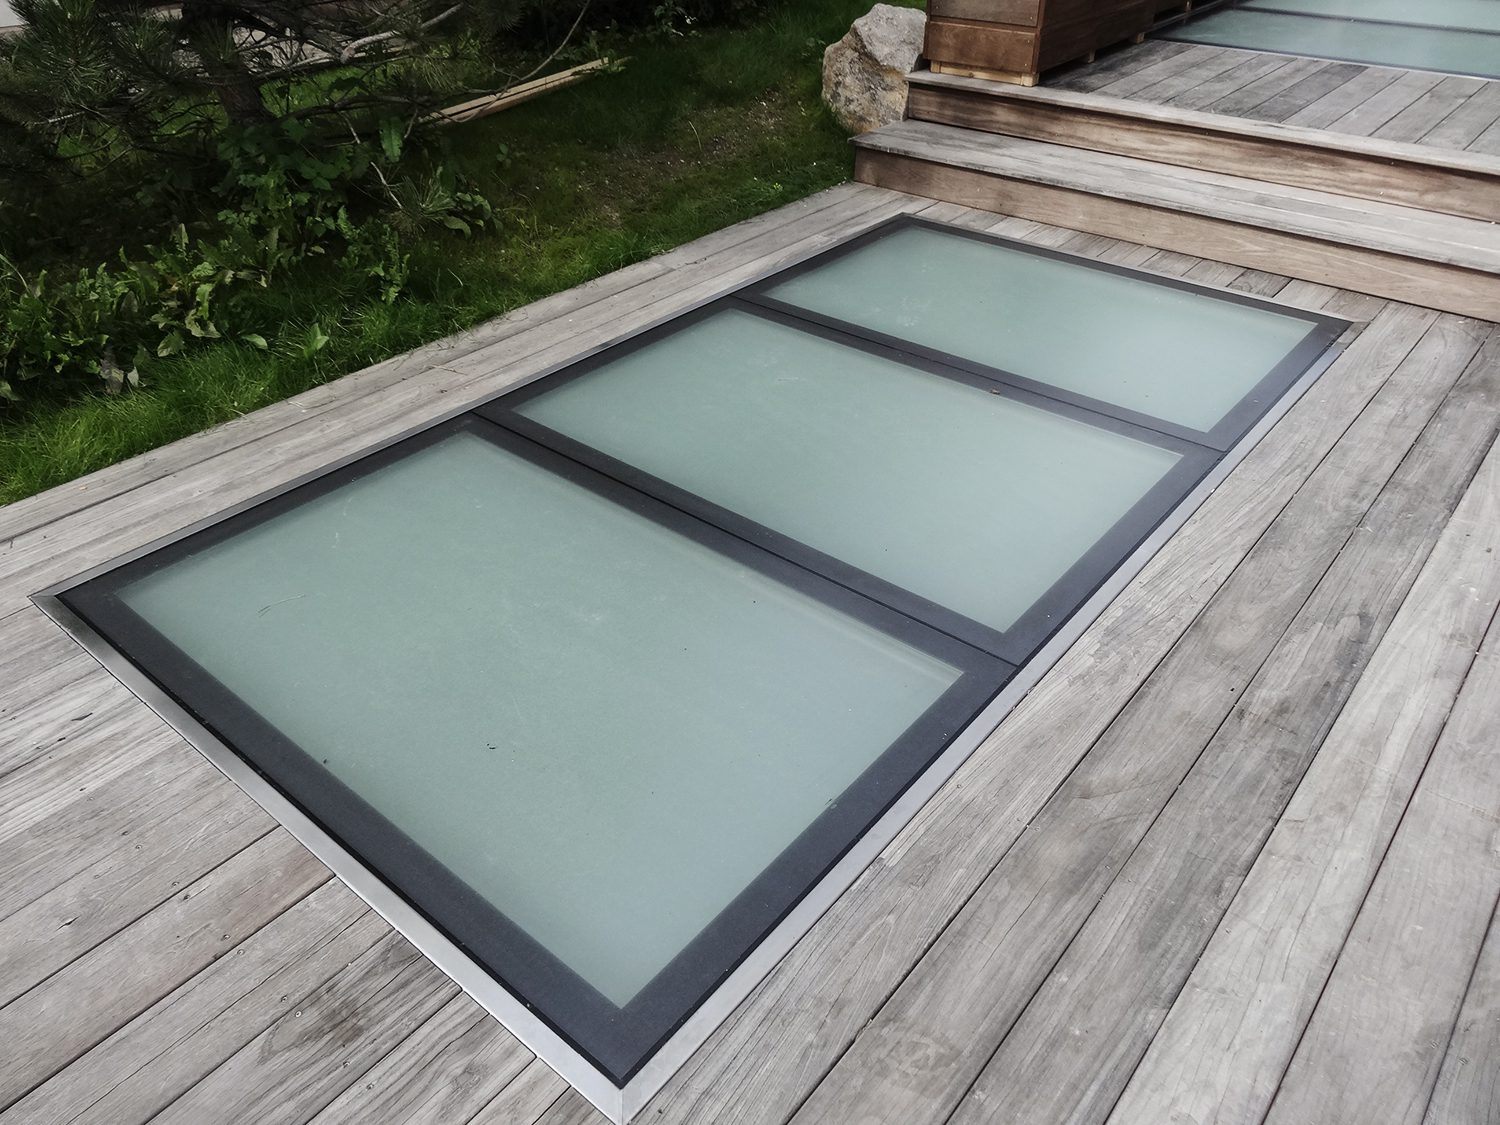 Walkable skylights for more daylight in the basement - Glassfloor Heliobus AG - daylight engineering - daylight solutions